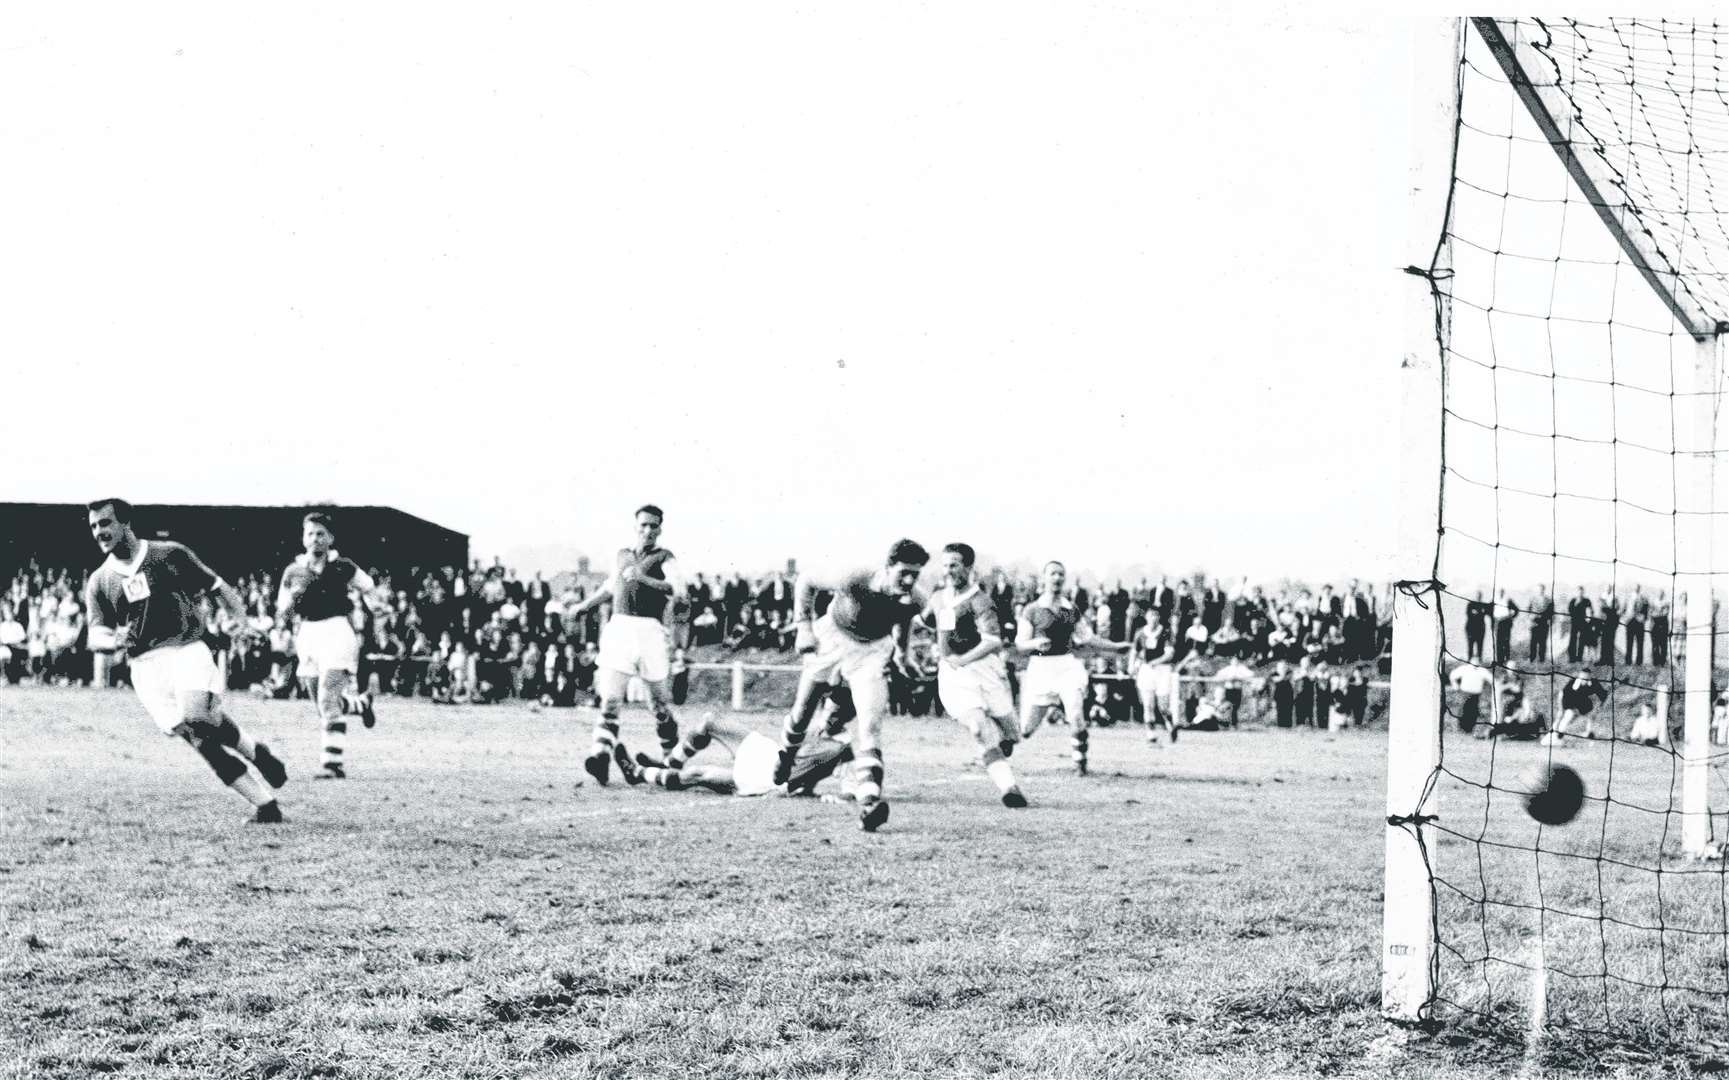 Canterbury City beat Ashford Town 3-2 when they played in the Kingsmead Stadium for the first time in August 1958